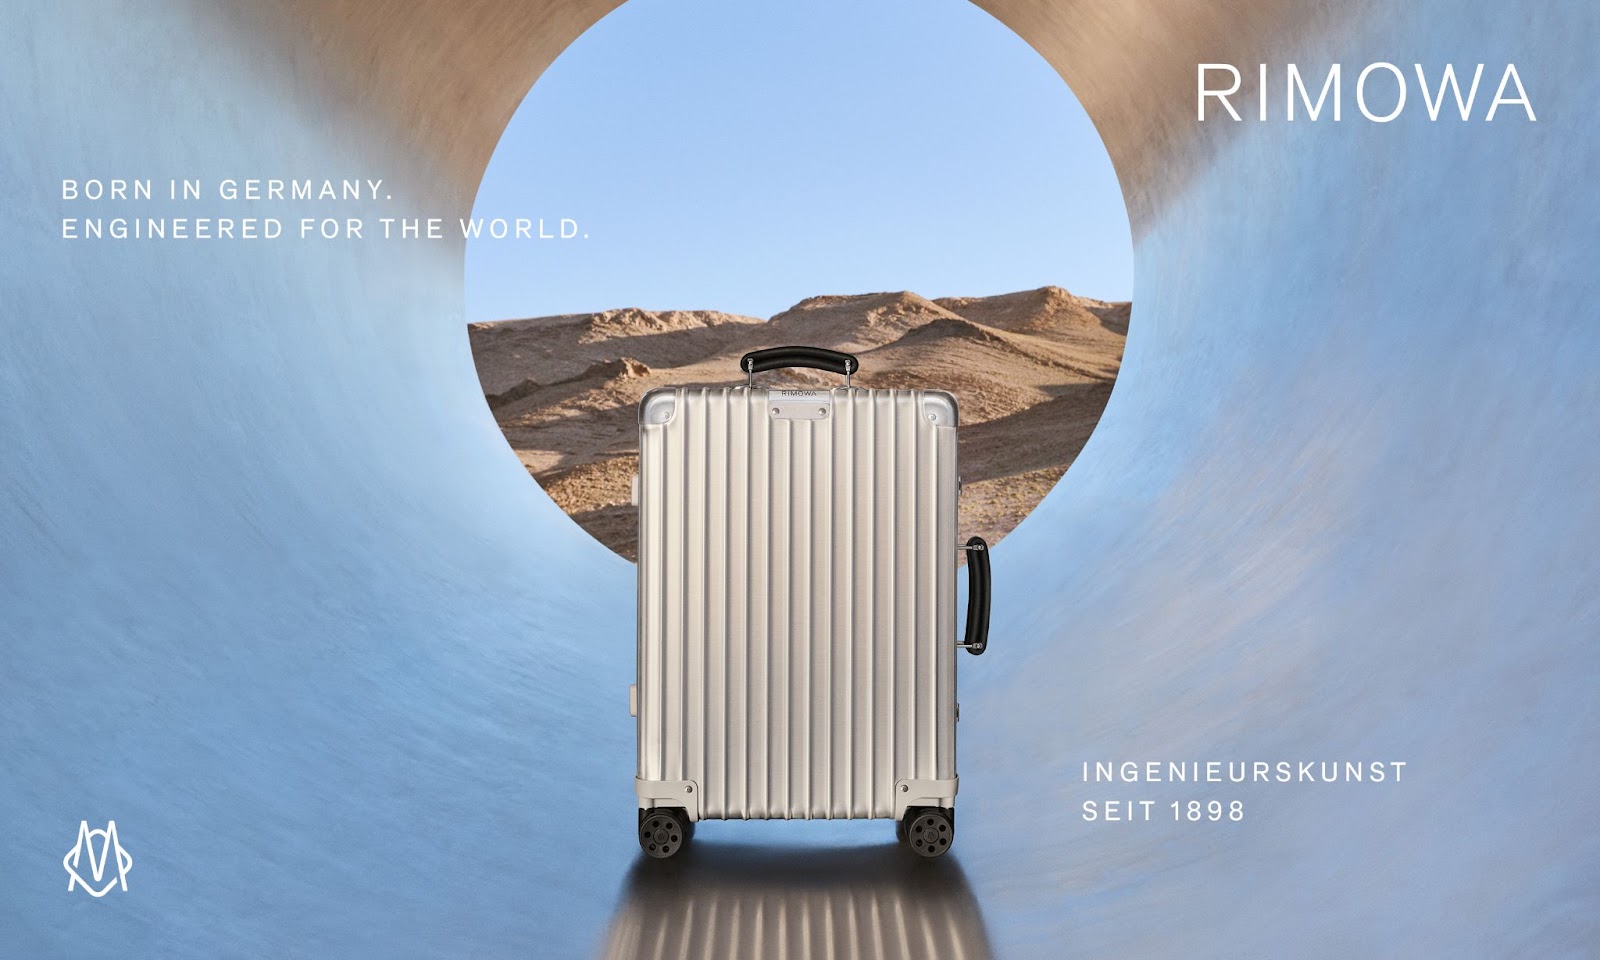 Rimowa: From Germany to the World Since 1898 • Ads of the World